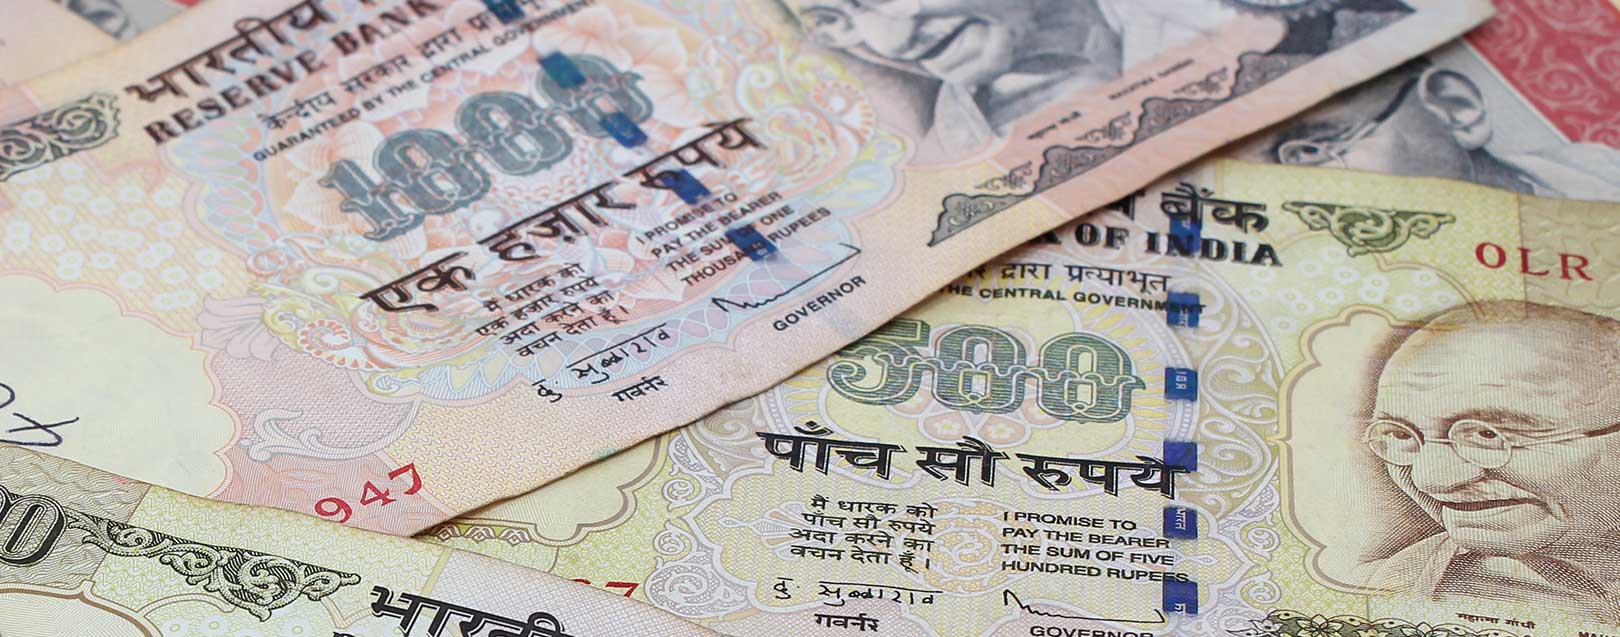 RBI imposes curbs on old note deposits exceeding Rs. 5,000